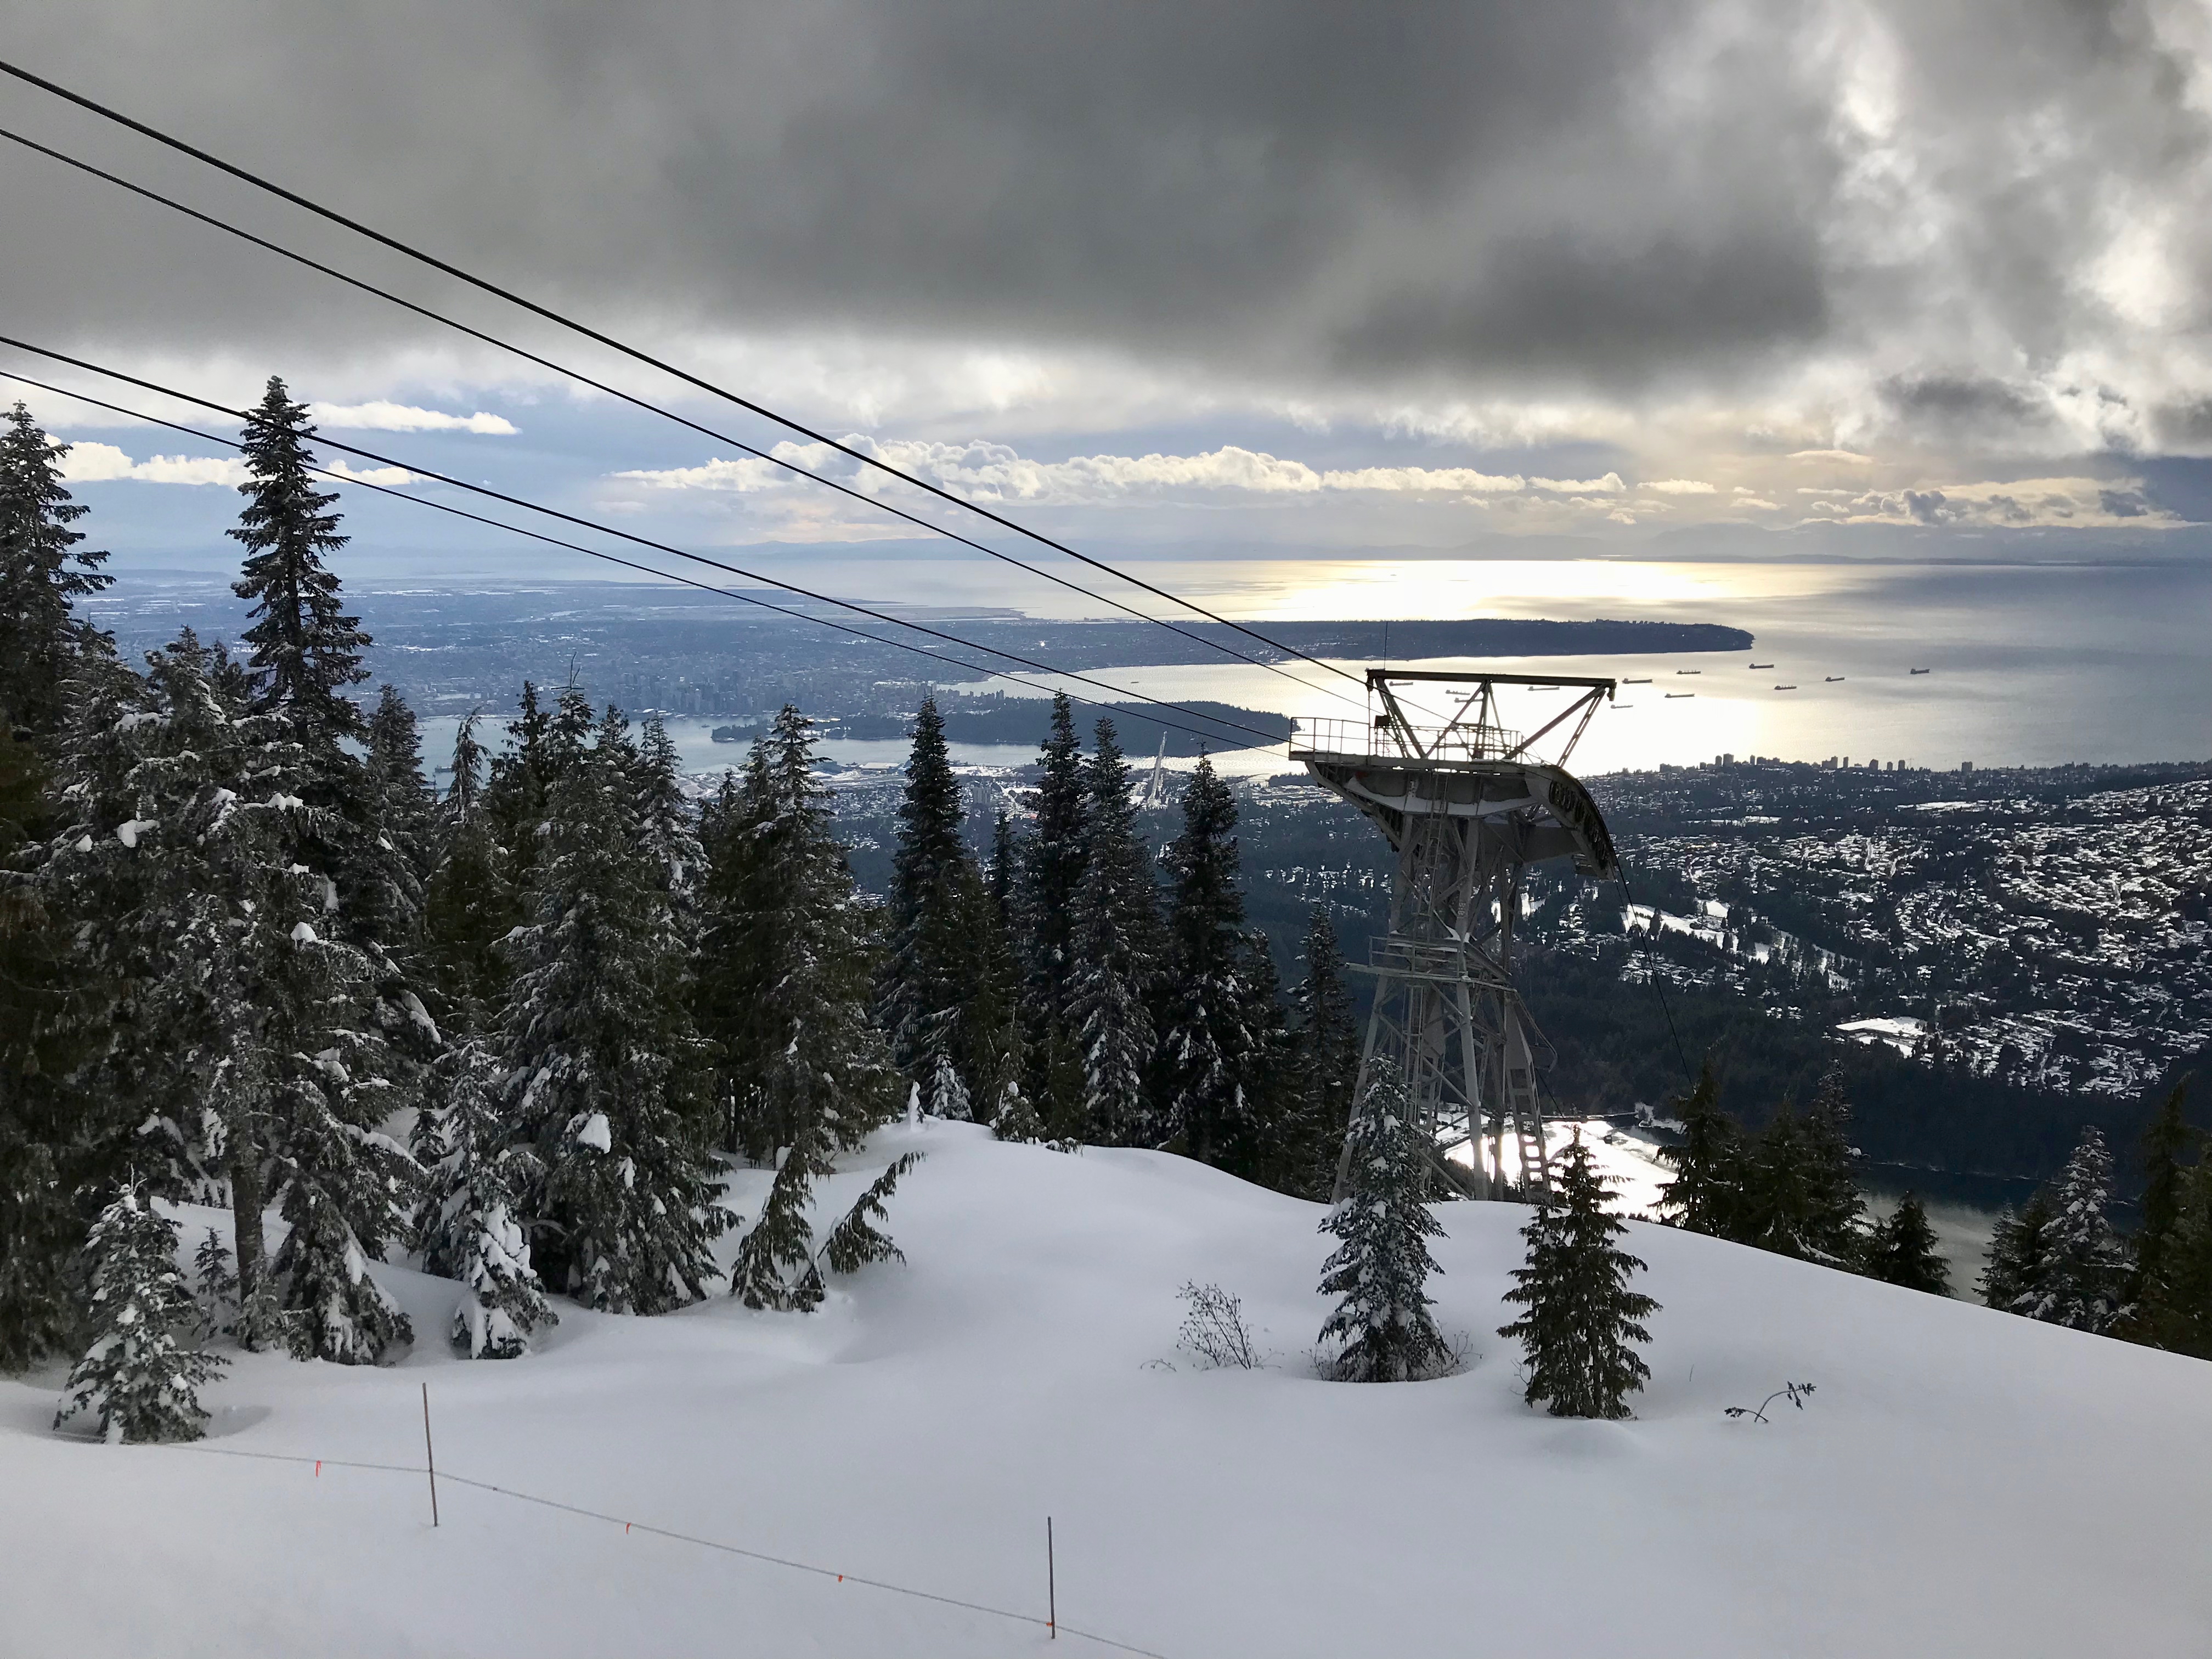 The view from Grouse Mountain